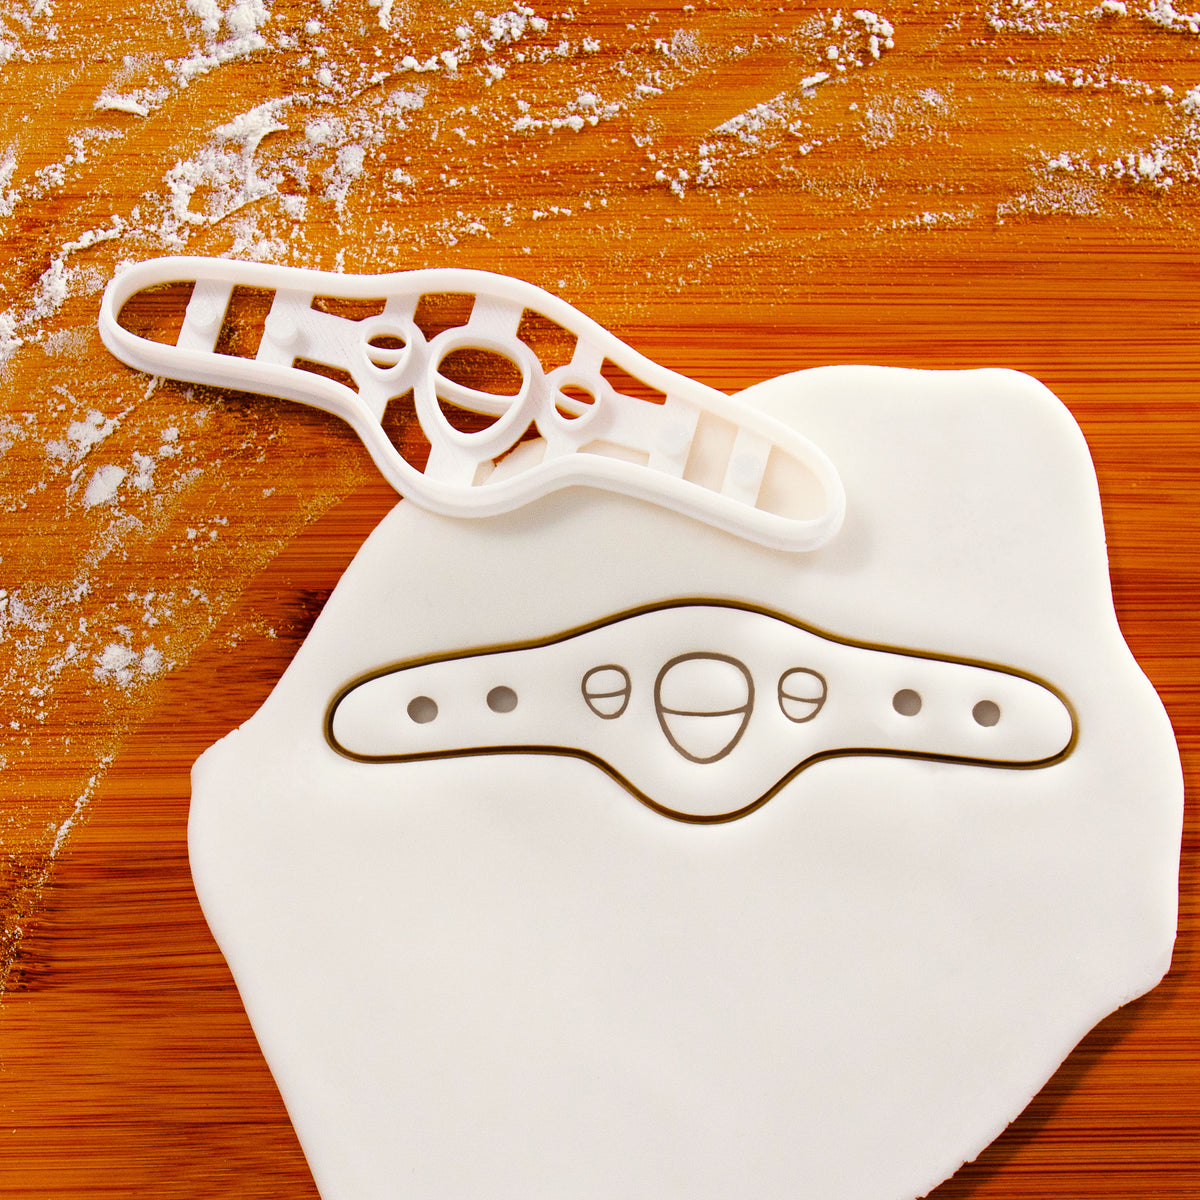 Dicot Leaf anatomy cookie Cutter